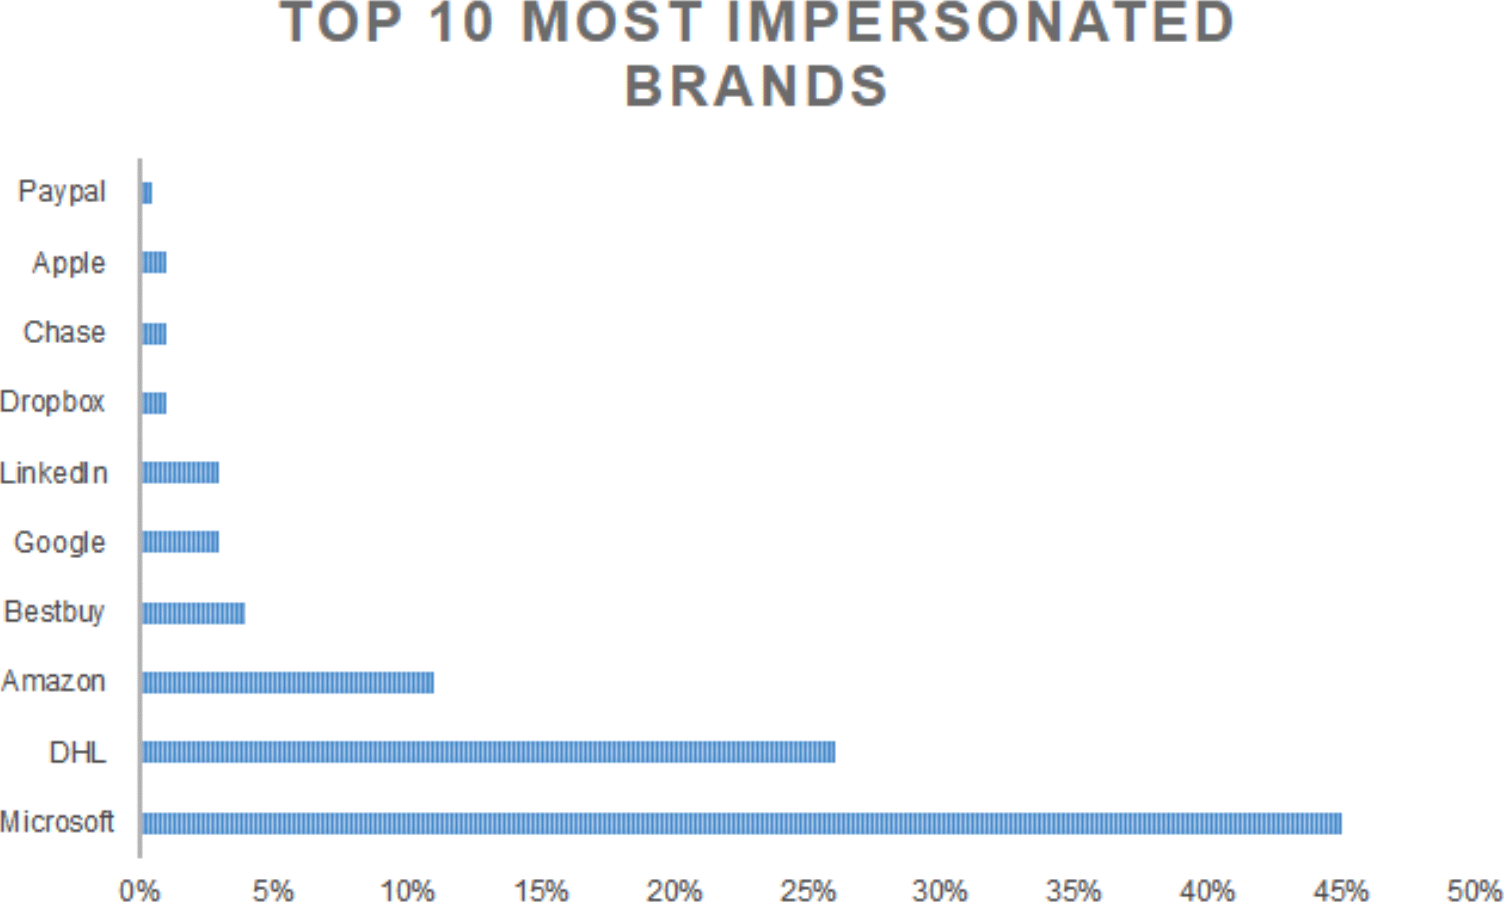 Q2 2021 Top 10 Most Impersonated Brands in Domains 50